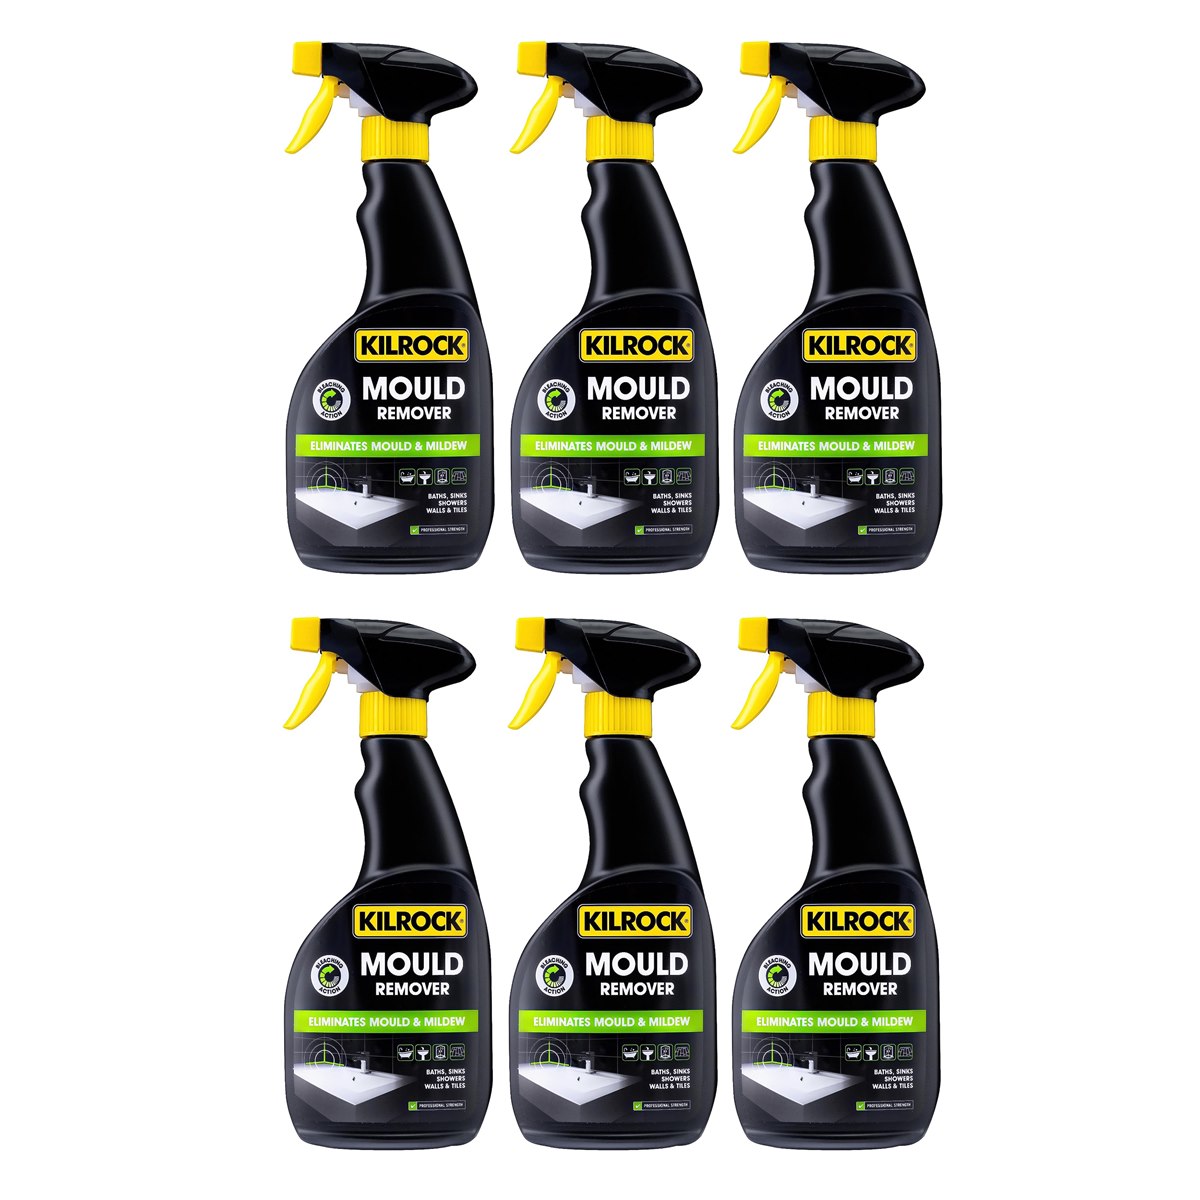 Case of 6 x Kilrock Professional Strength Mould Remover Spray